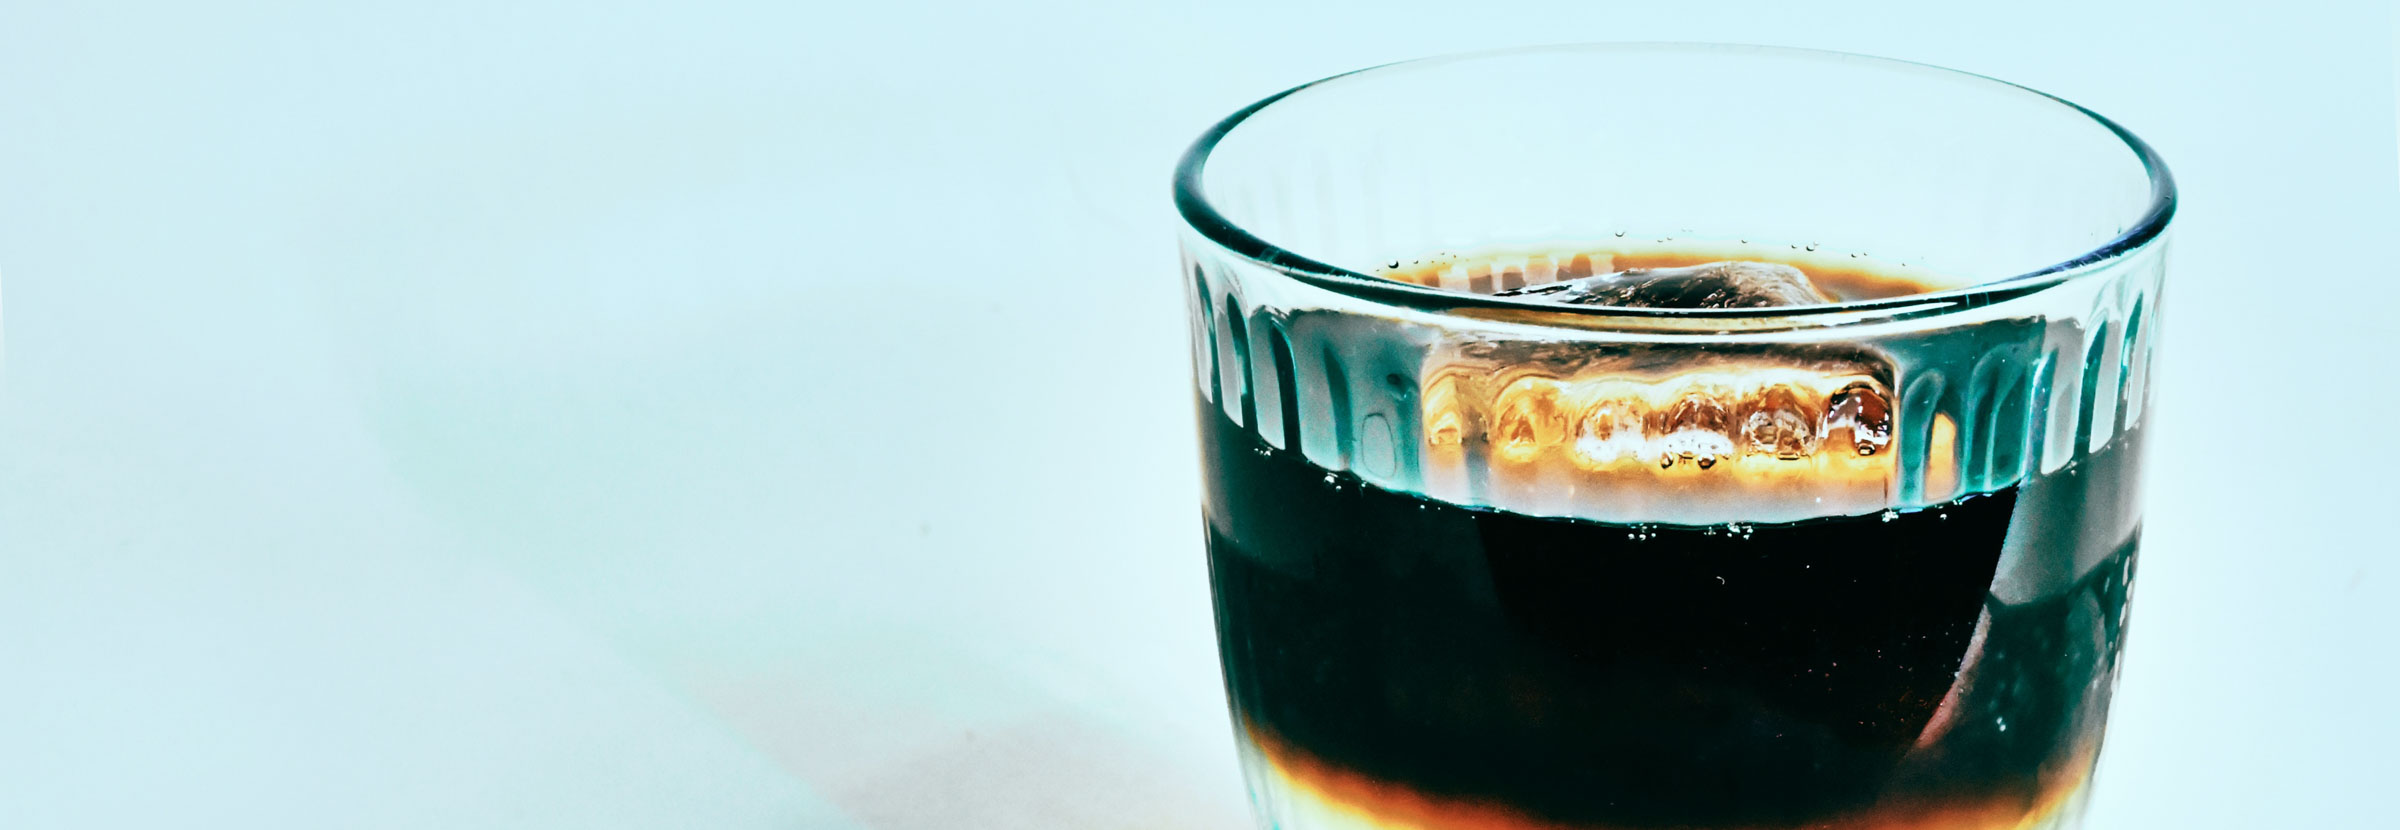 A glass filled with a cold coffee beverage.